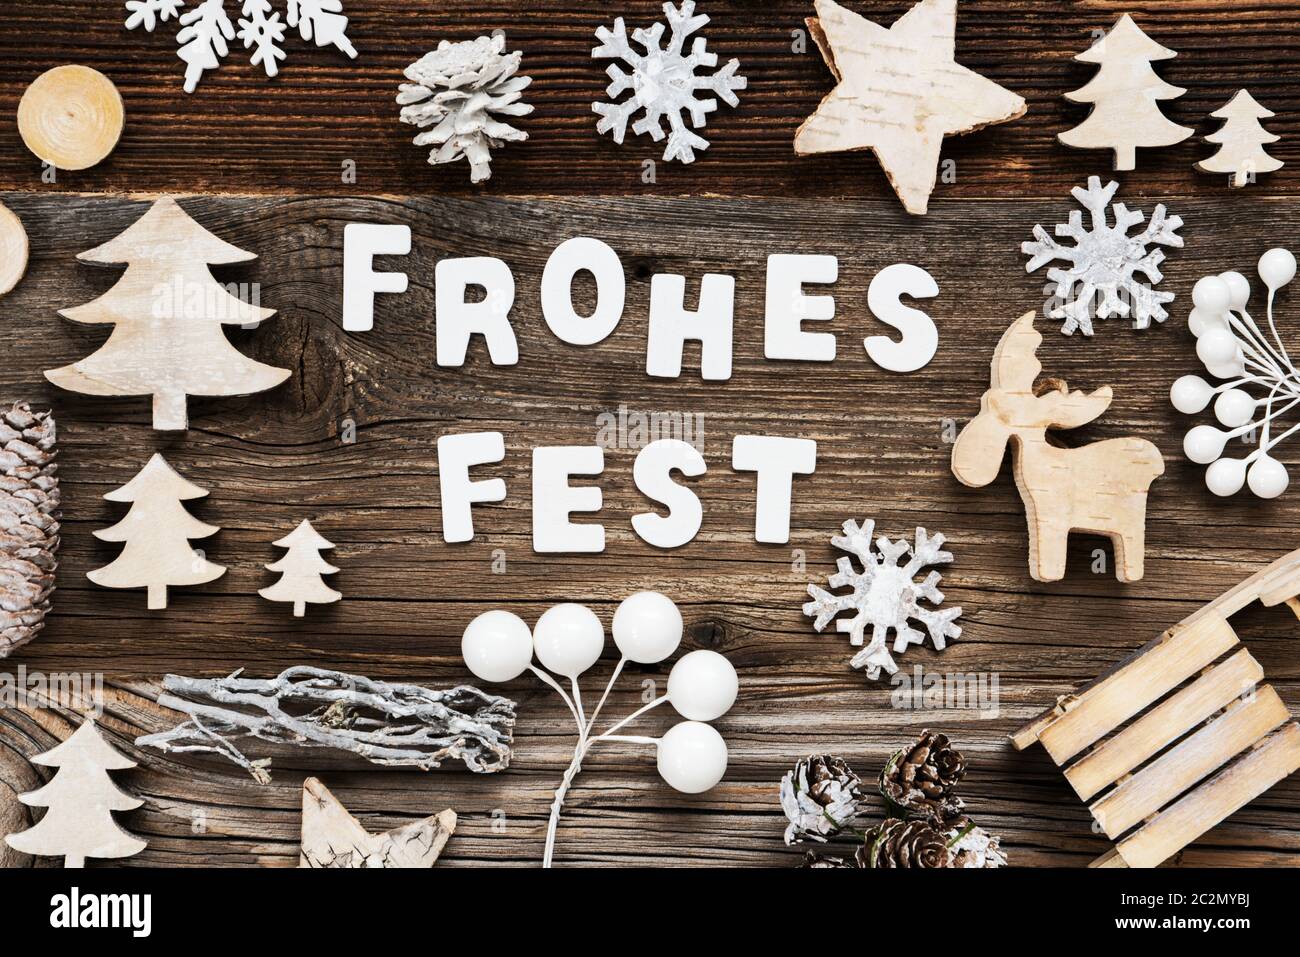 White Letters Building The Word Frohes Fest Means Merry Christmas. Wooden Christmas Decoration Like Sled And Tree And Star. Brown Wooden Background Stock Photo